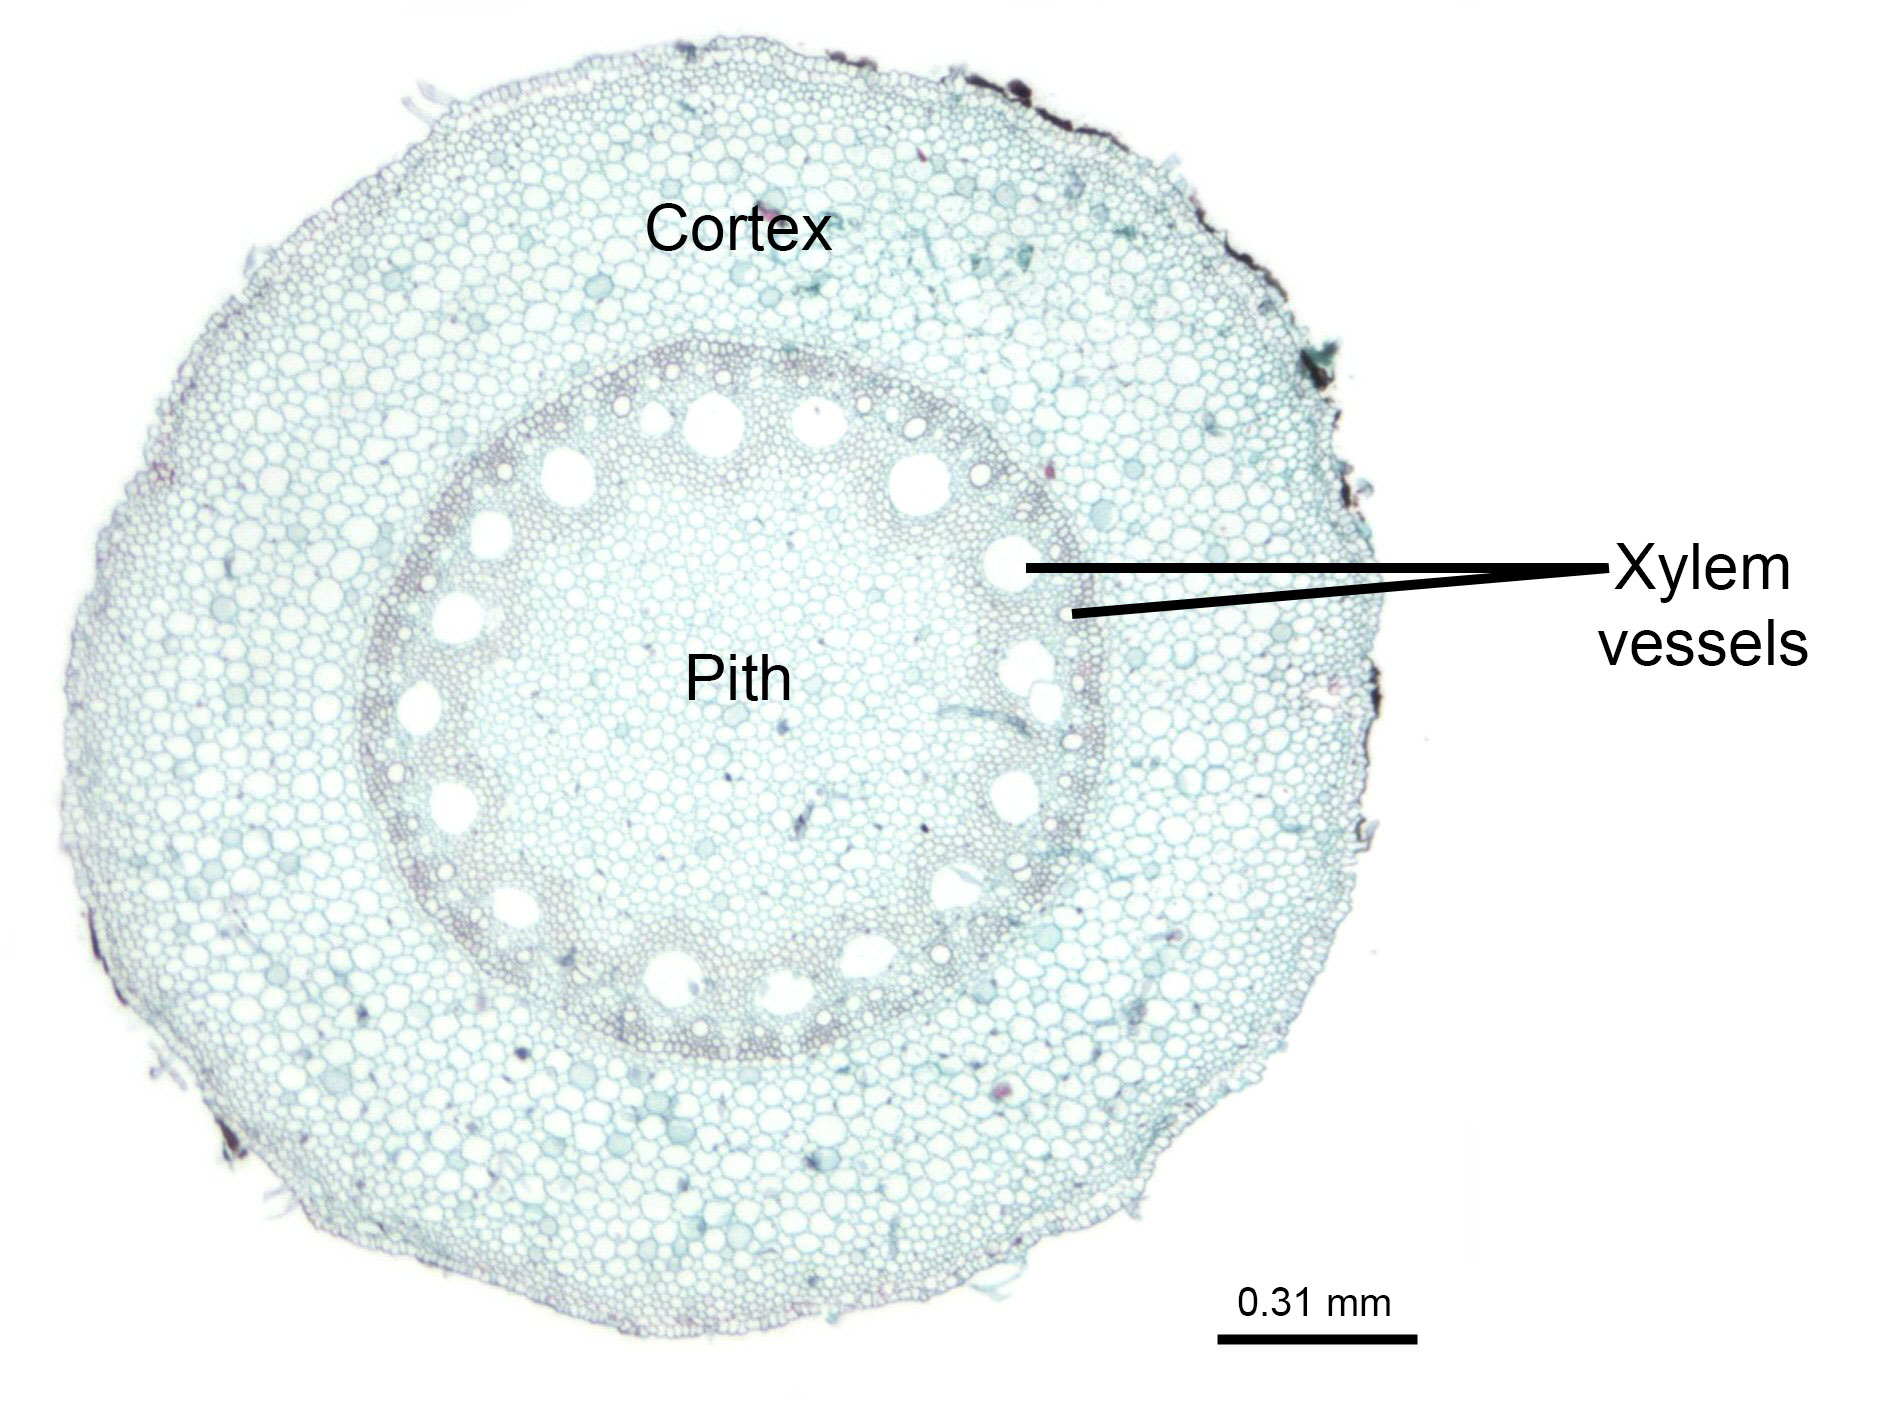 Photograph of a stained cross section of a maize root taken with a microscope. The photo shows a circular root with a large cortex, a large pith, and a ring of vascular tissue in between. Two xylem vessels, one large and one small, indicated by empty spaces, are labeled.